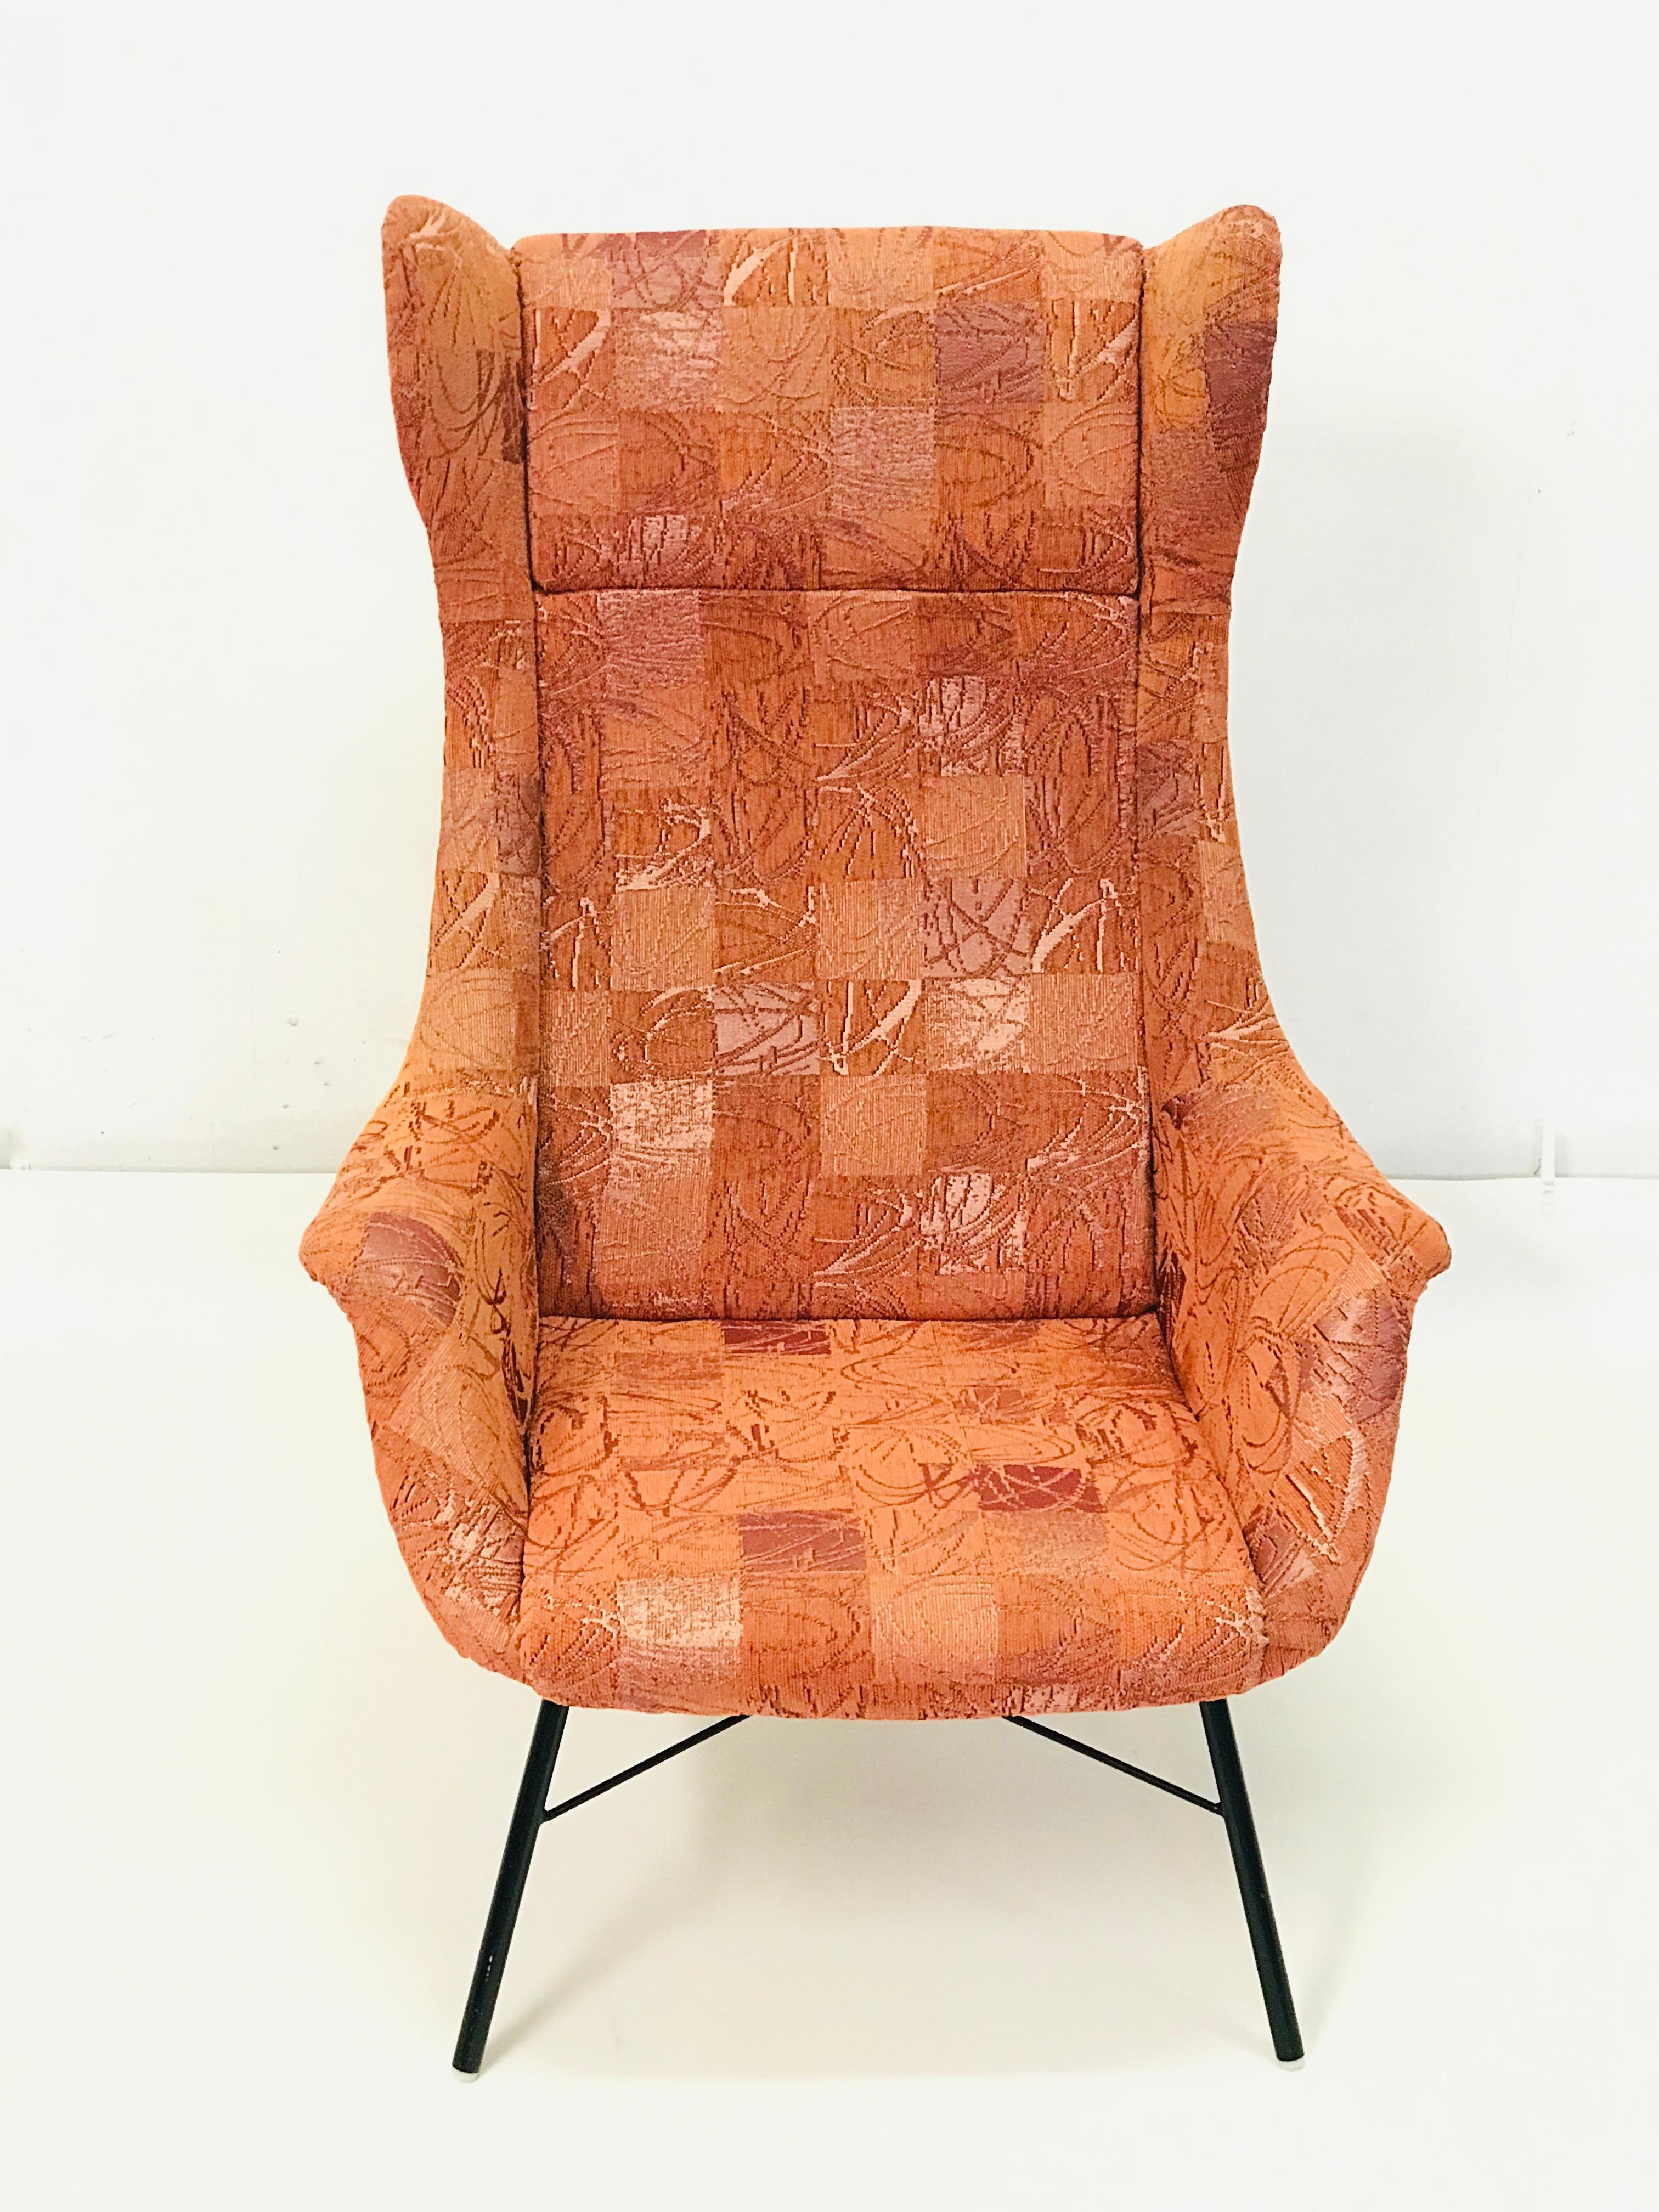 This armchair was designed by Miroslav Navrátil for the company Ton in the year 1960. The armchair is in a very nice and original condition.